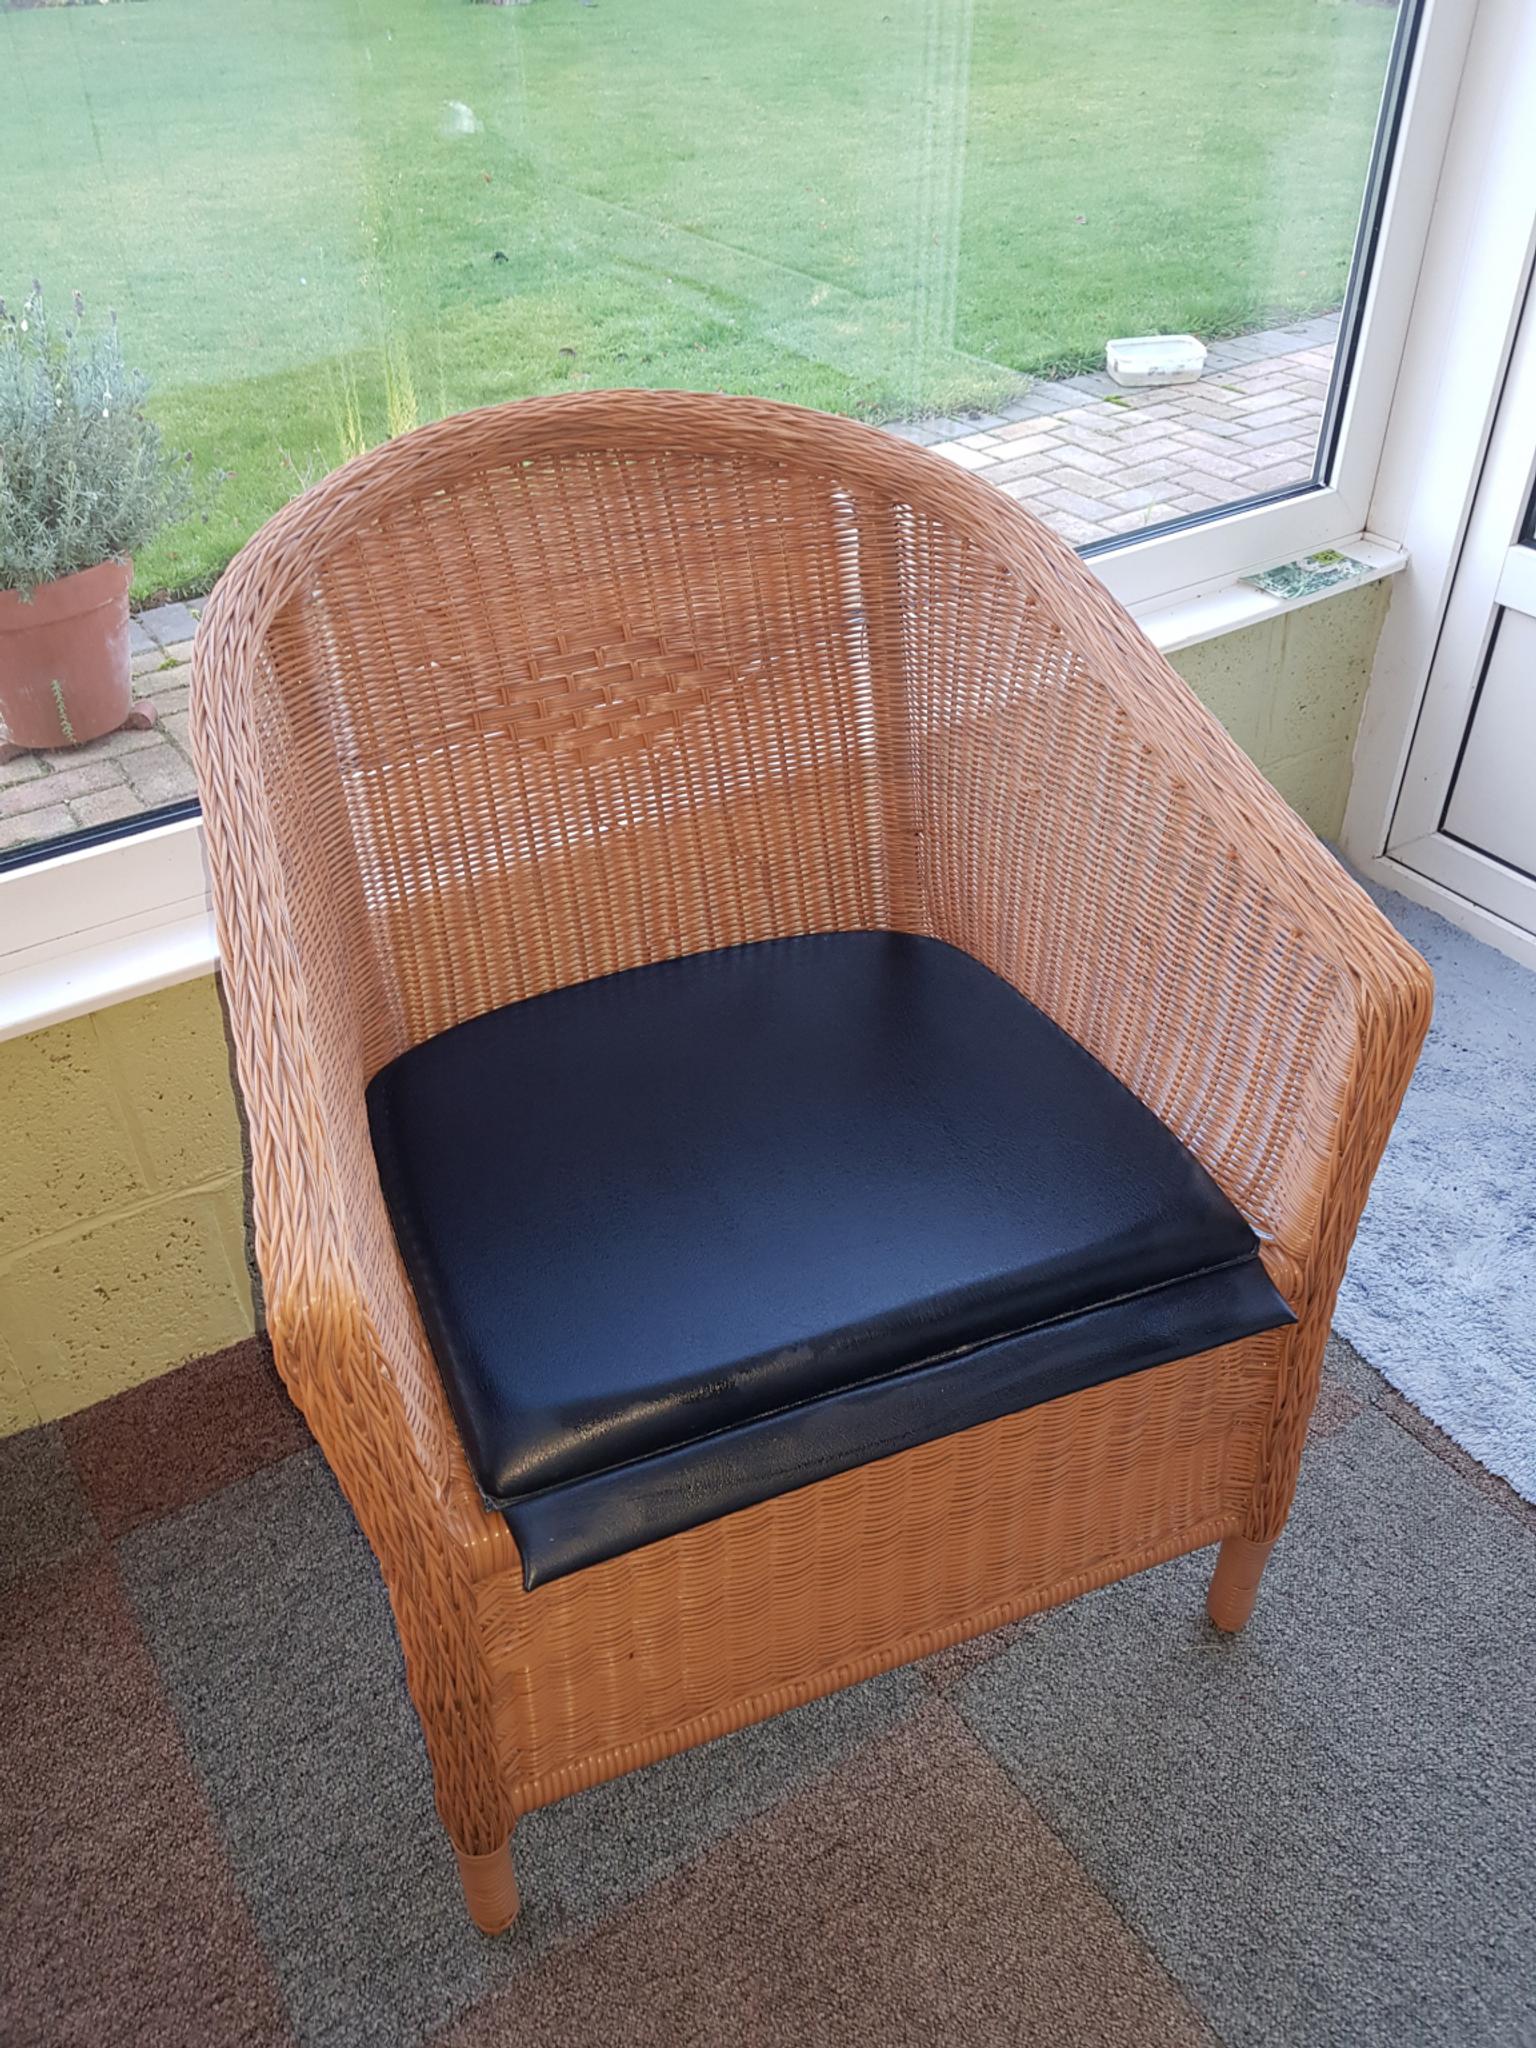 Bedroom Wicker Commode Chair In Pr5 Ribble For 50 00 For Sale